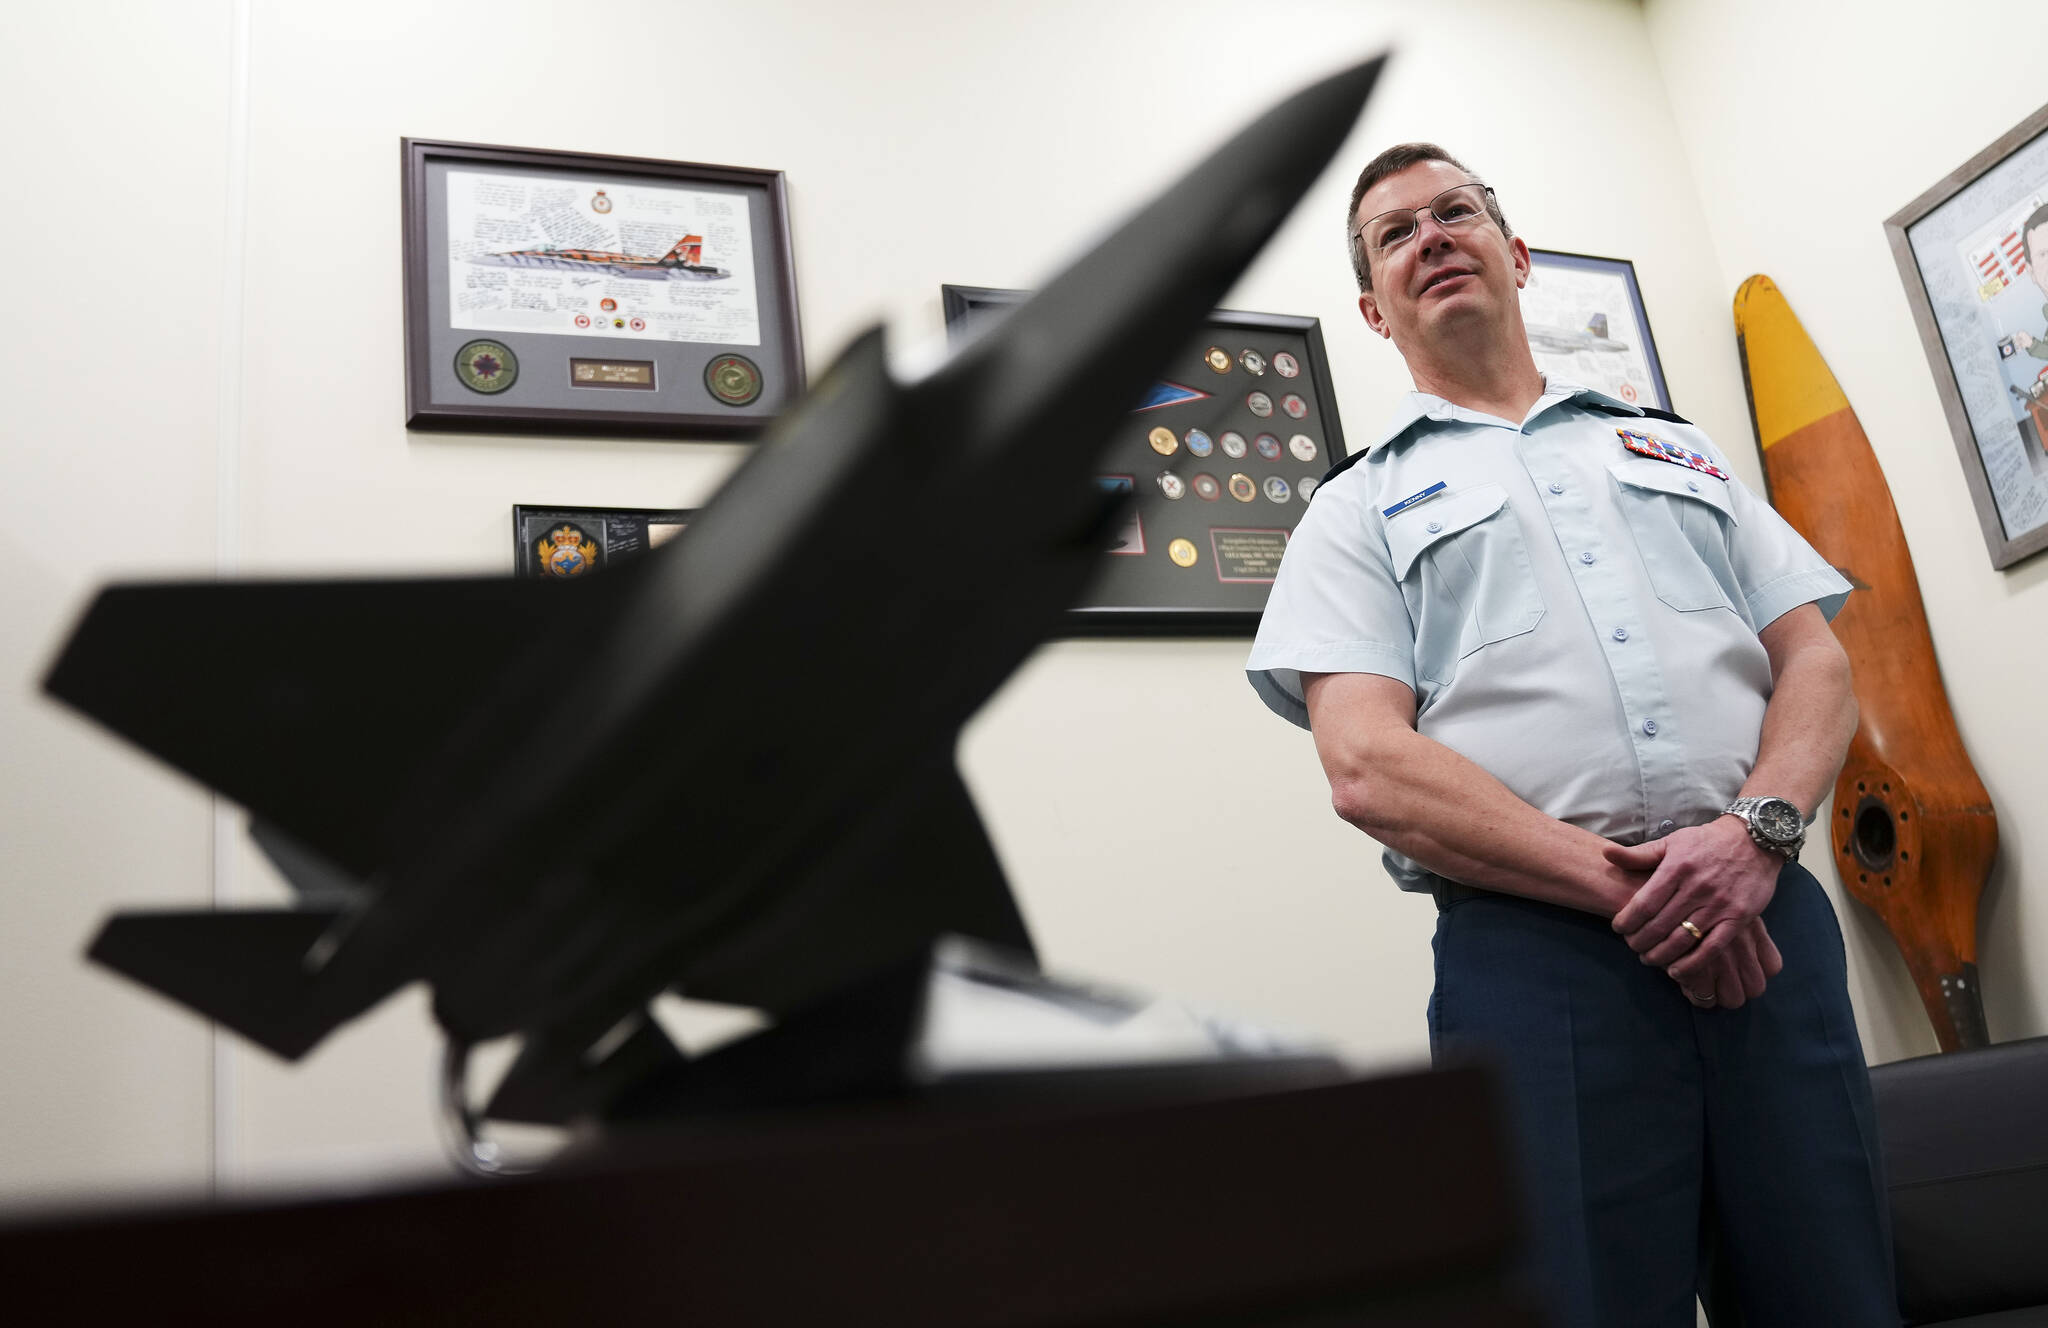 A model of a F-35 fighter jet sits on the desk of Lt.-Gen. Eric Kenny as he poses for a portrait at the National Defence Headquarters (Carling) in Ottawa on Thursday, Feb. 9, 2023. THE CANADIAN PRESS/Sean Kilpatrick